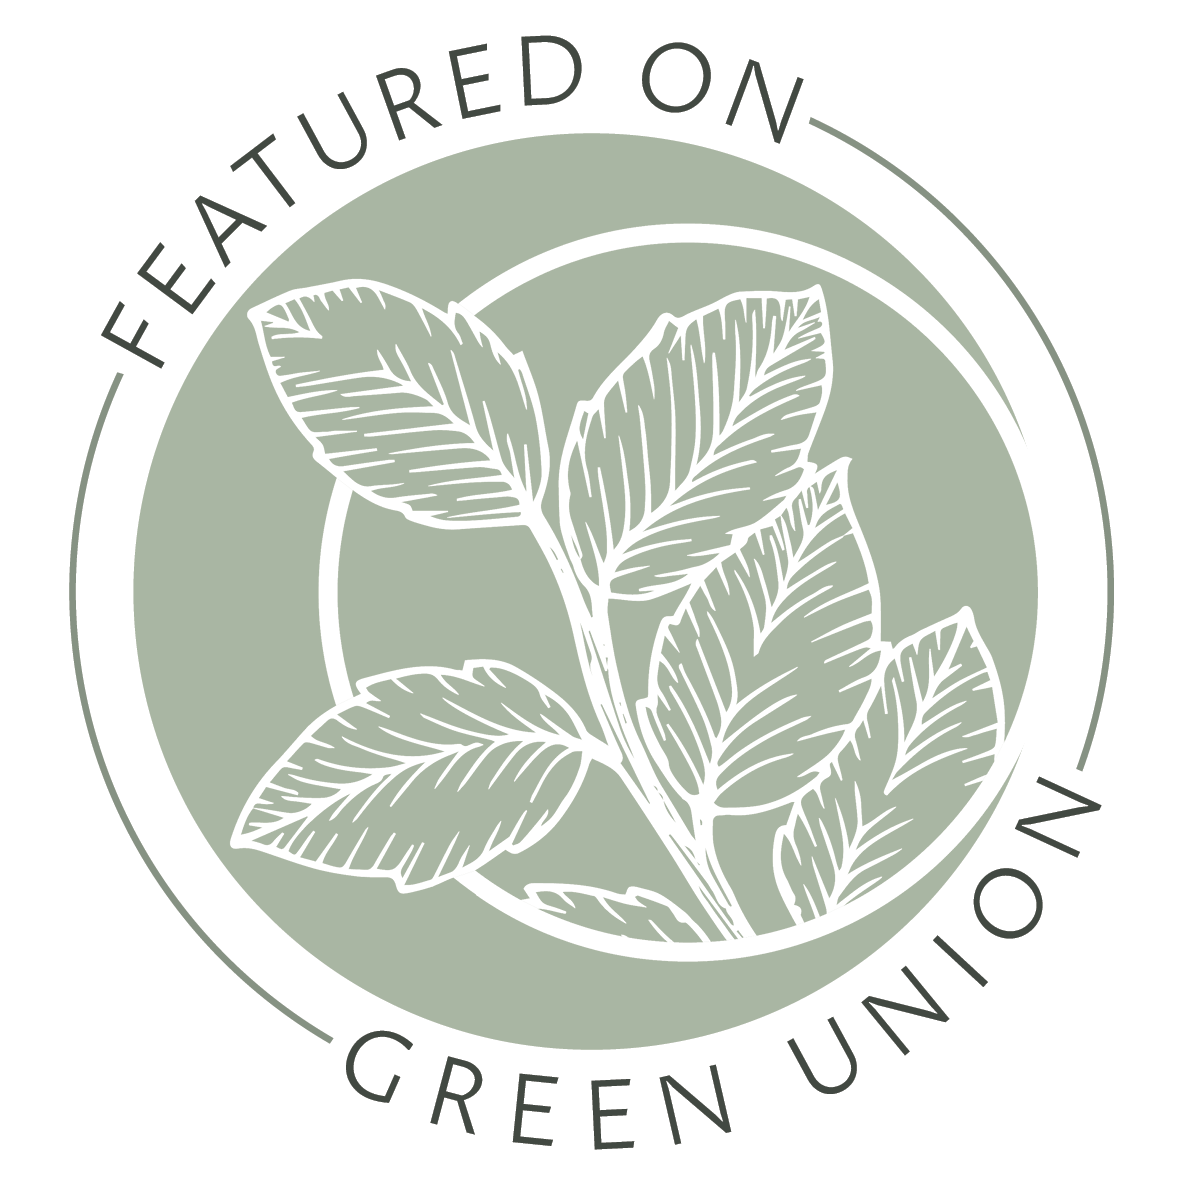 GREEN UNION FEATURED BADGE DEC 2018.png